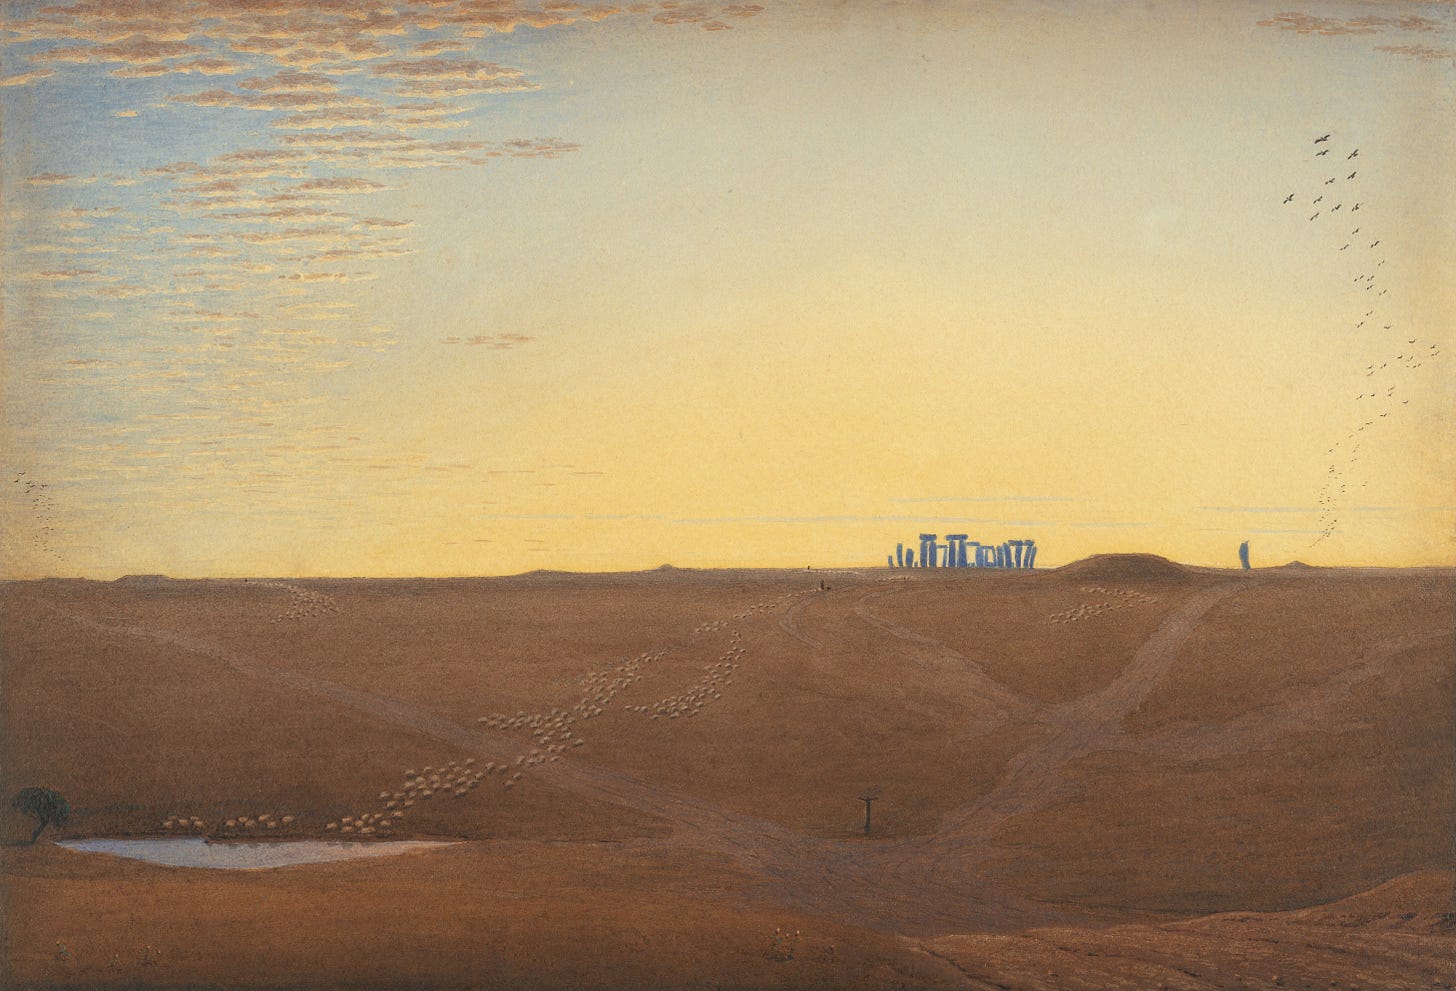 a landscape drawing of Stonehenge sitting on the crest of a brown hill. the sky is yelow with whispy clouds on the left and a soft gradient in blue. there are birds flying into the sky in the right of the picture, and sheep walking up the hill to stonehenge on the crest from a watering hole with a tree. tere is a dirt crossroad in the landscape 